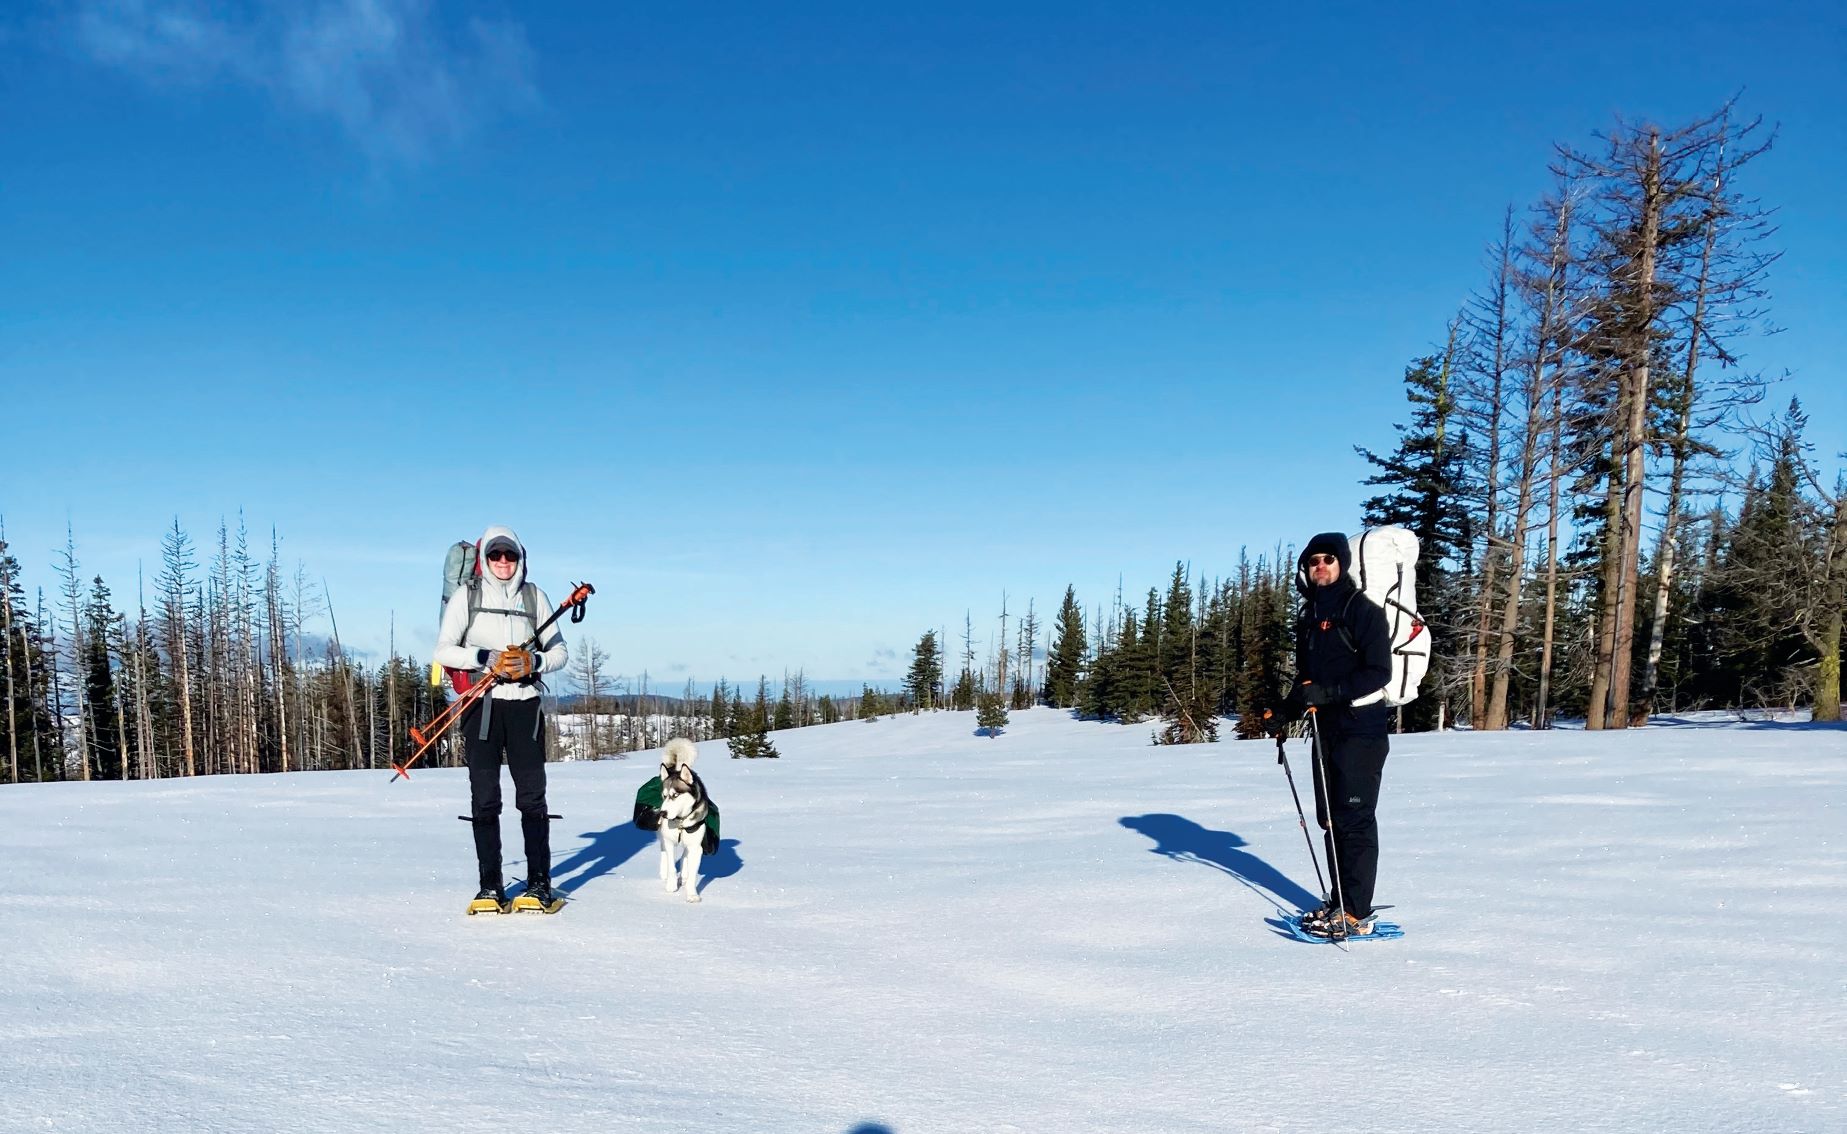 Two people on snowshoes with trekking poles and wearing large backpacks, and the author's white and black husky dog.